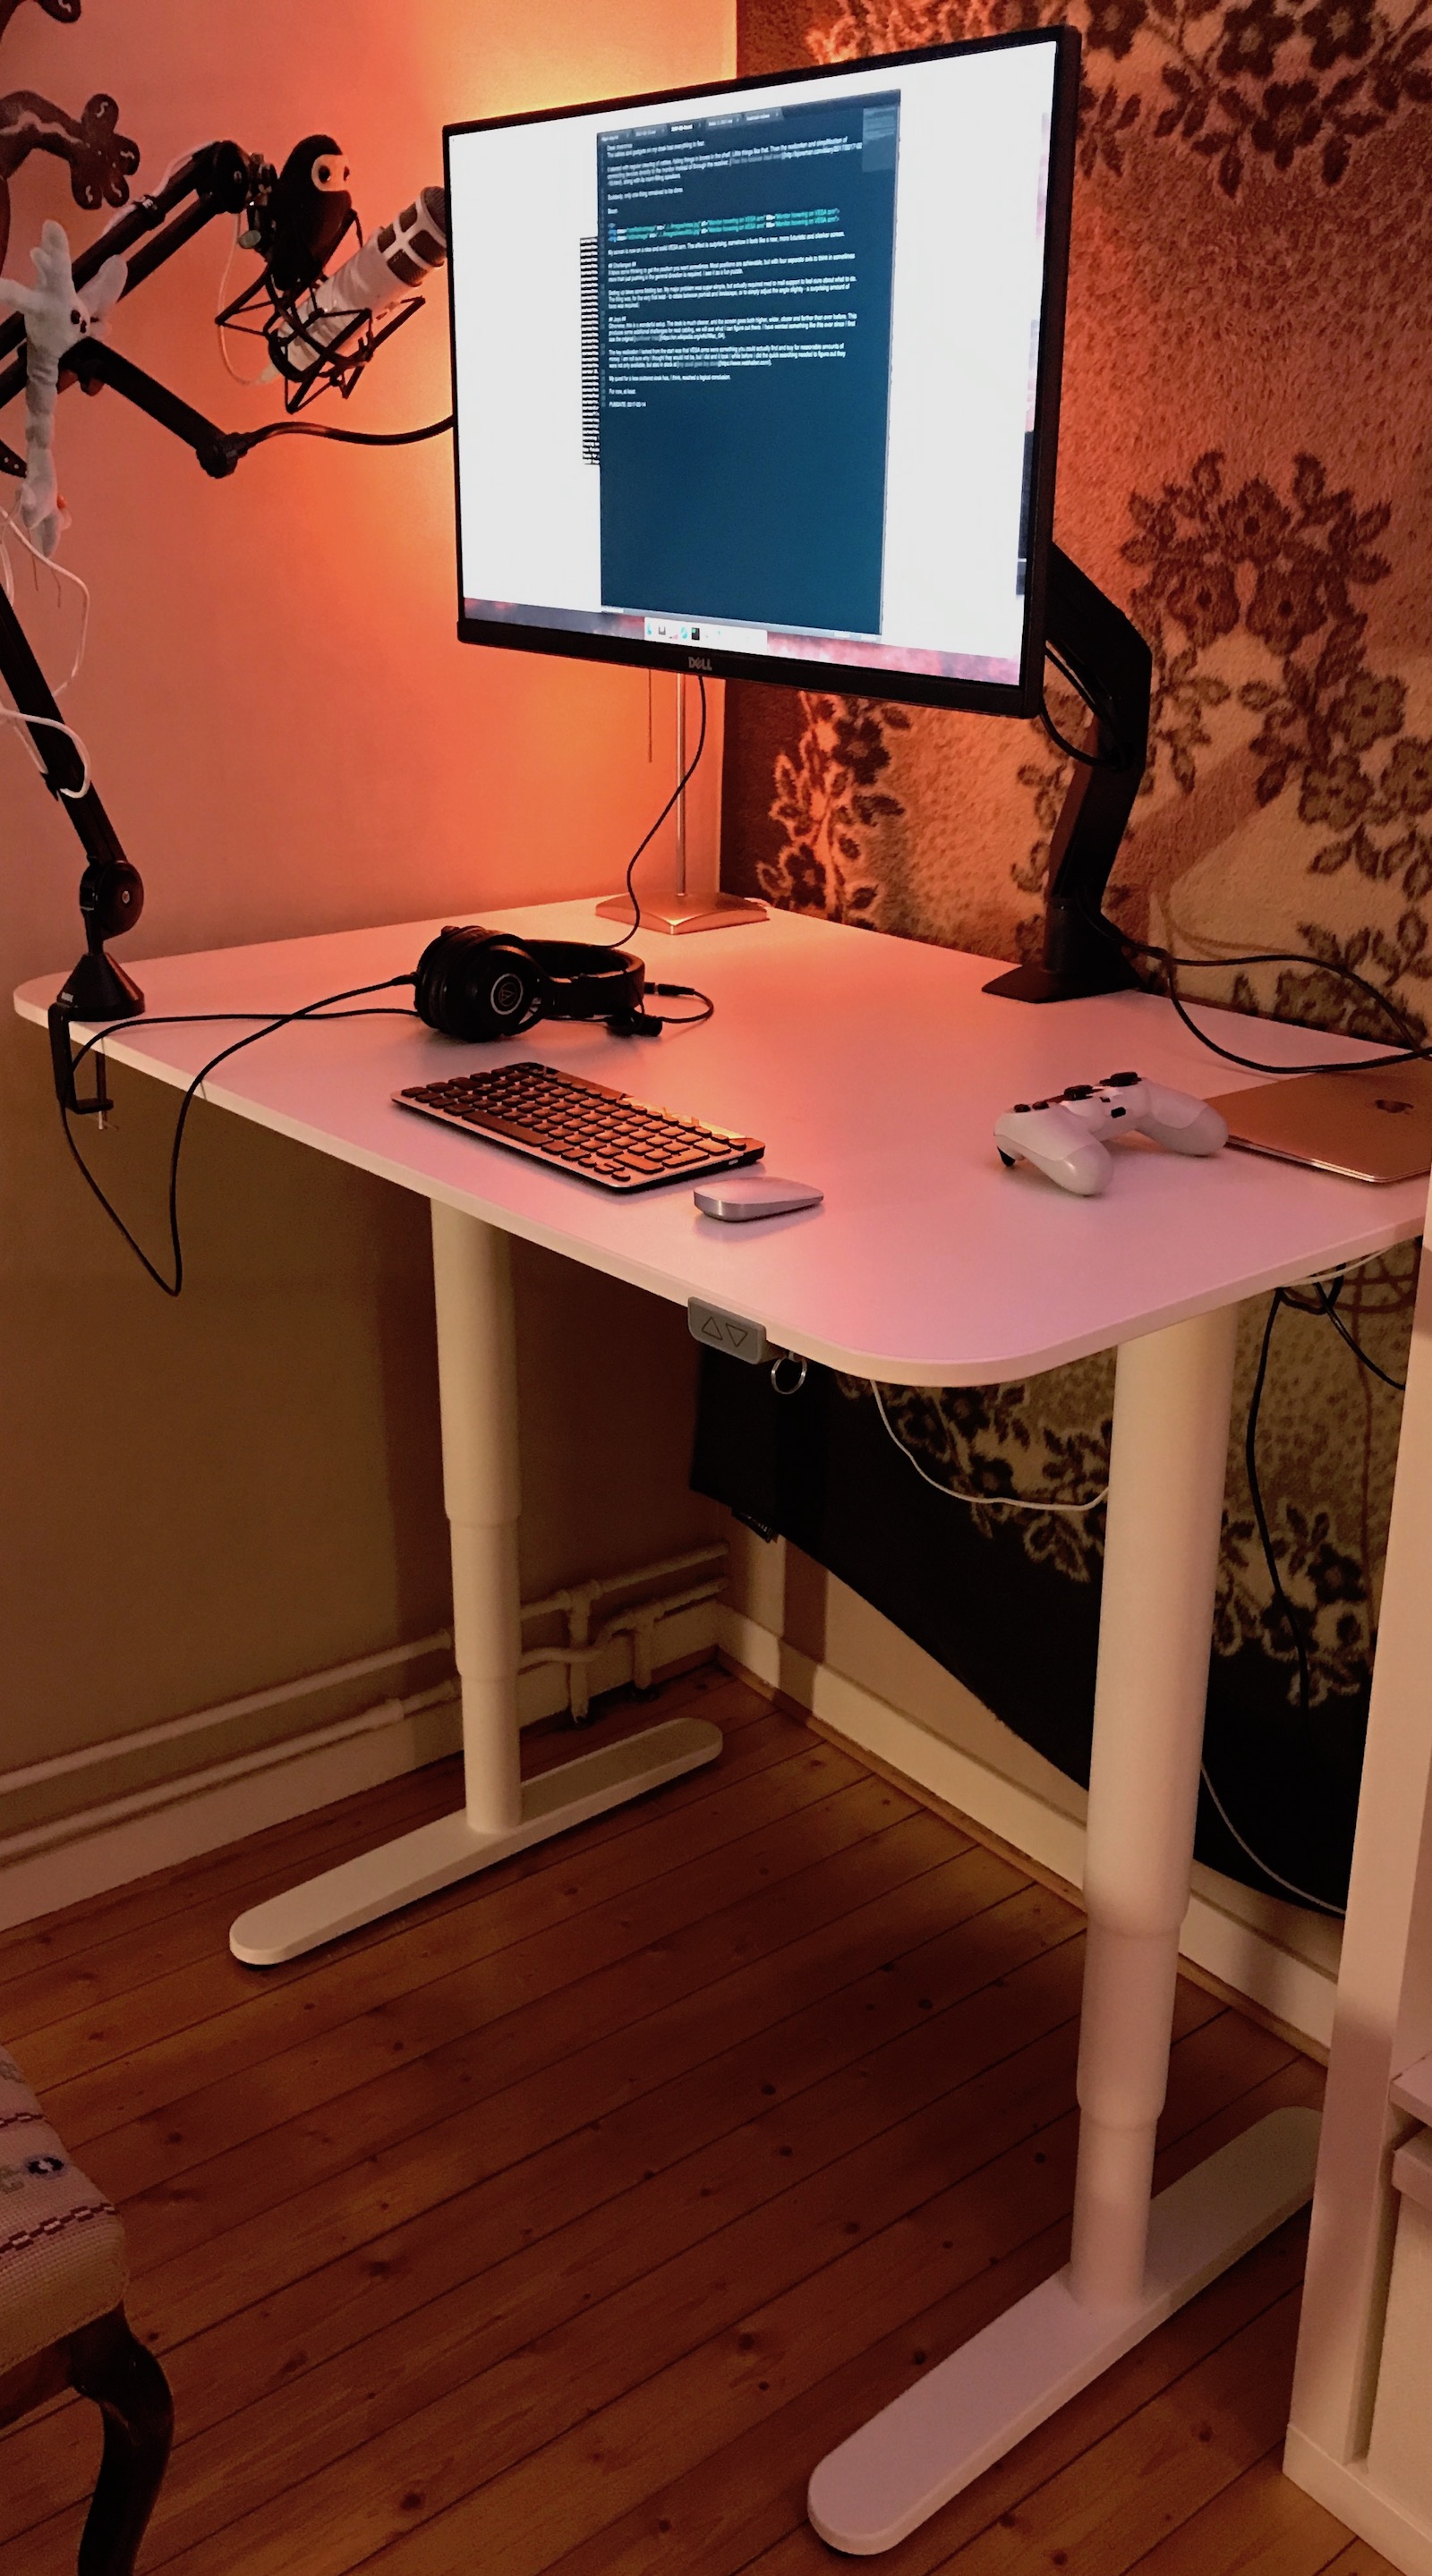 The whole desk, in standing configuration